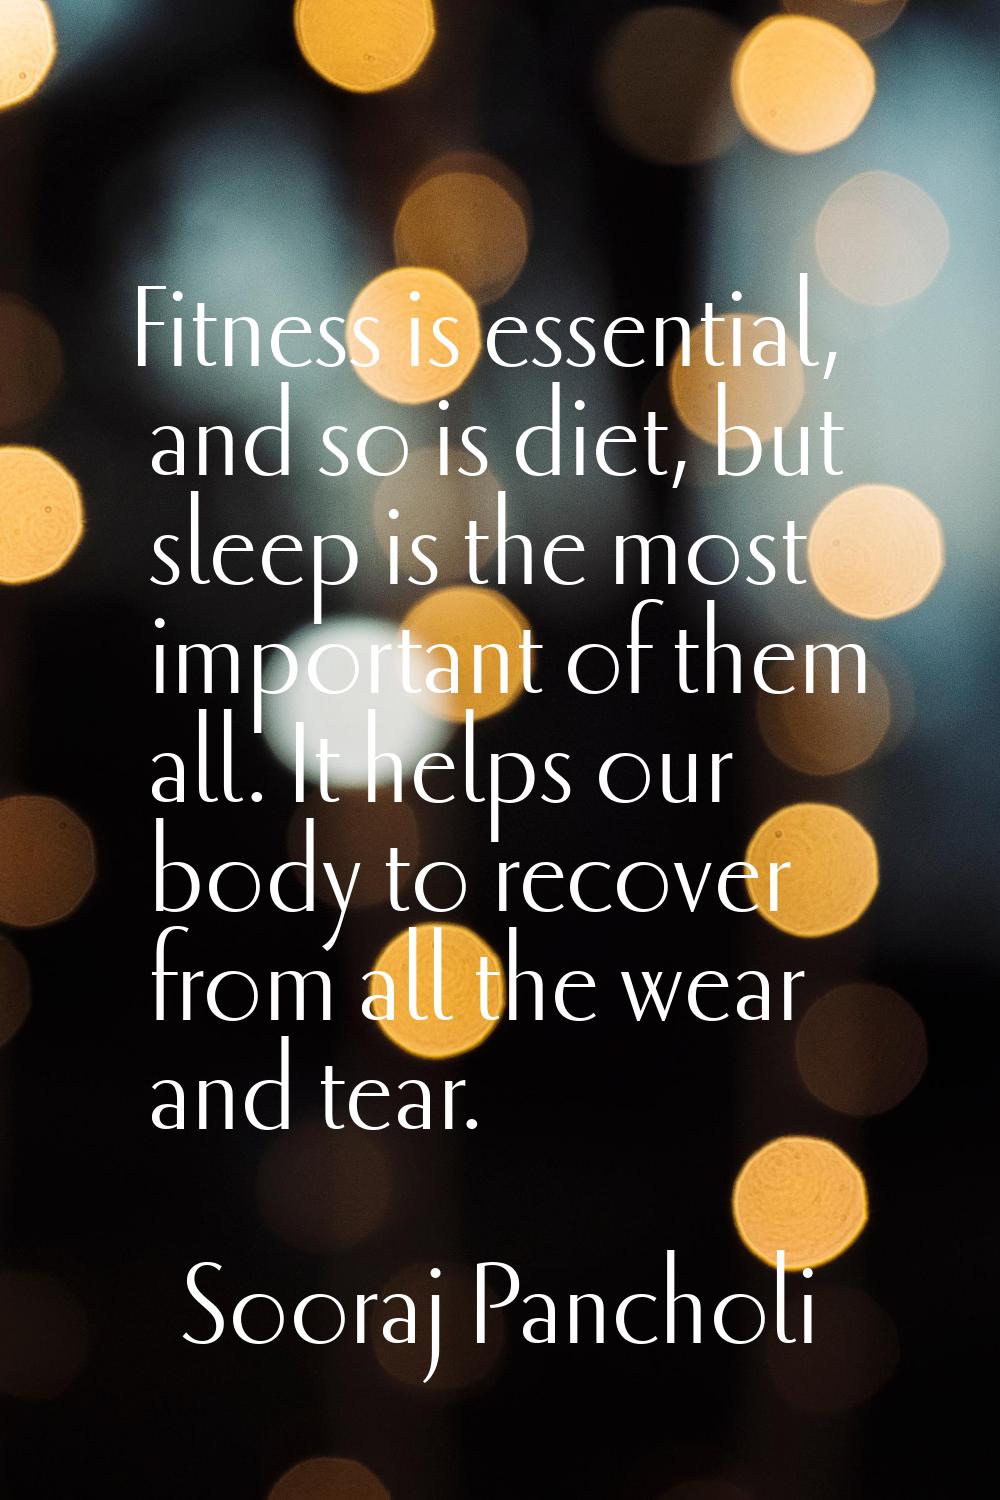 Fitness is essential, and so is diet, but sleep is the most important of them all. It helps our bod